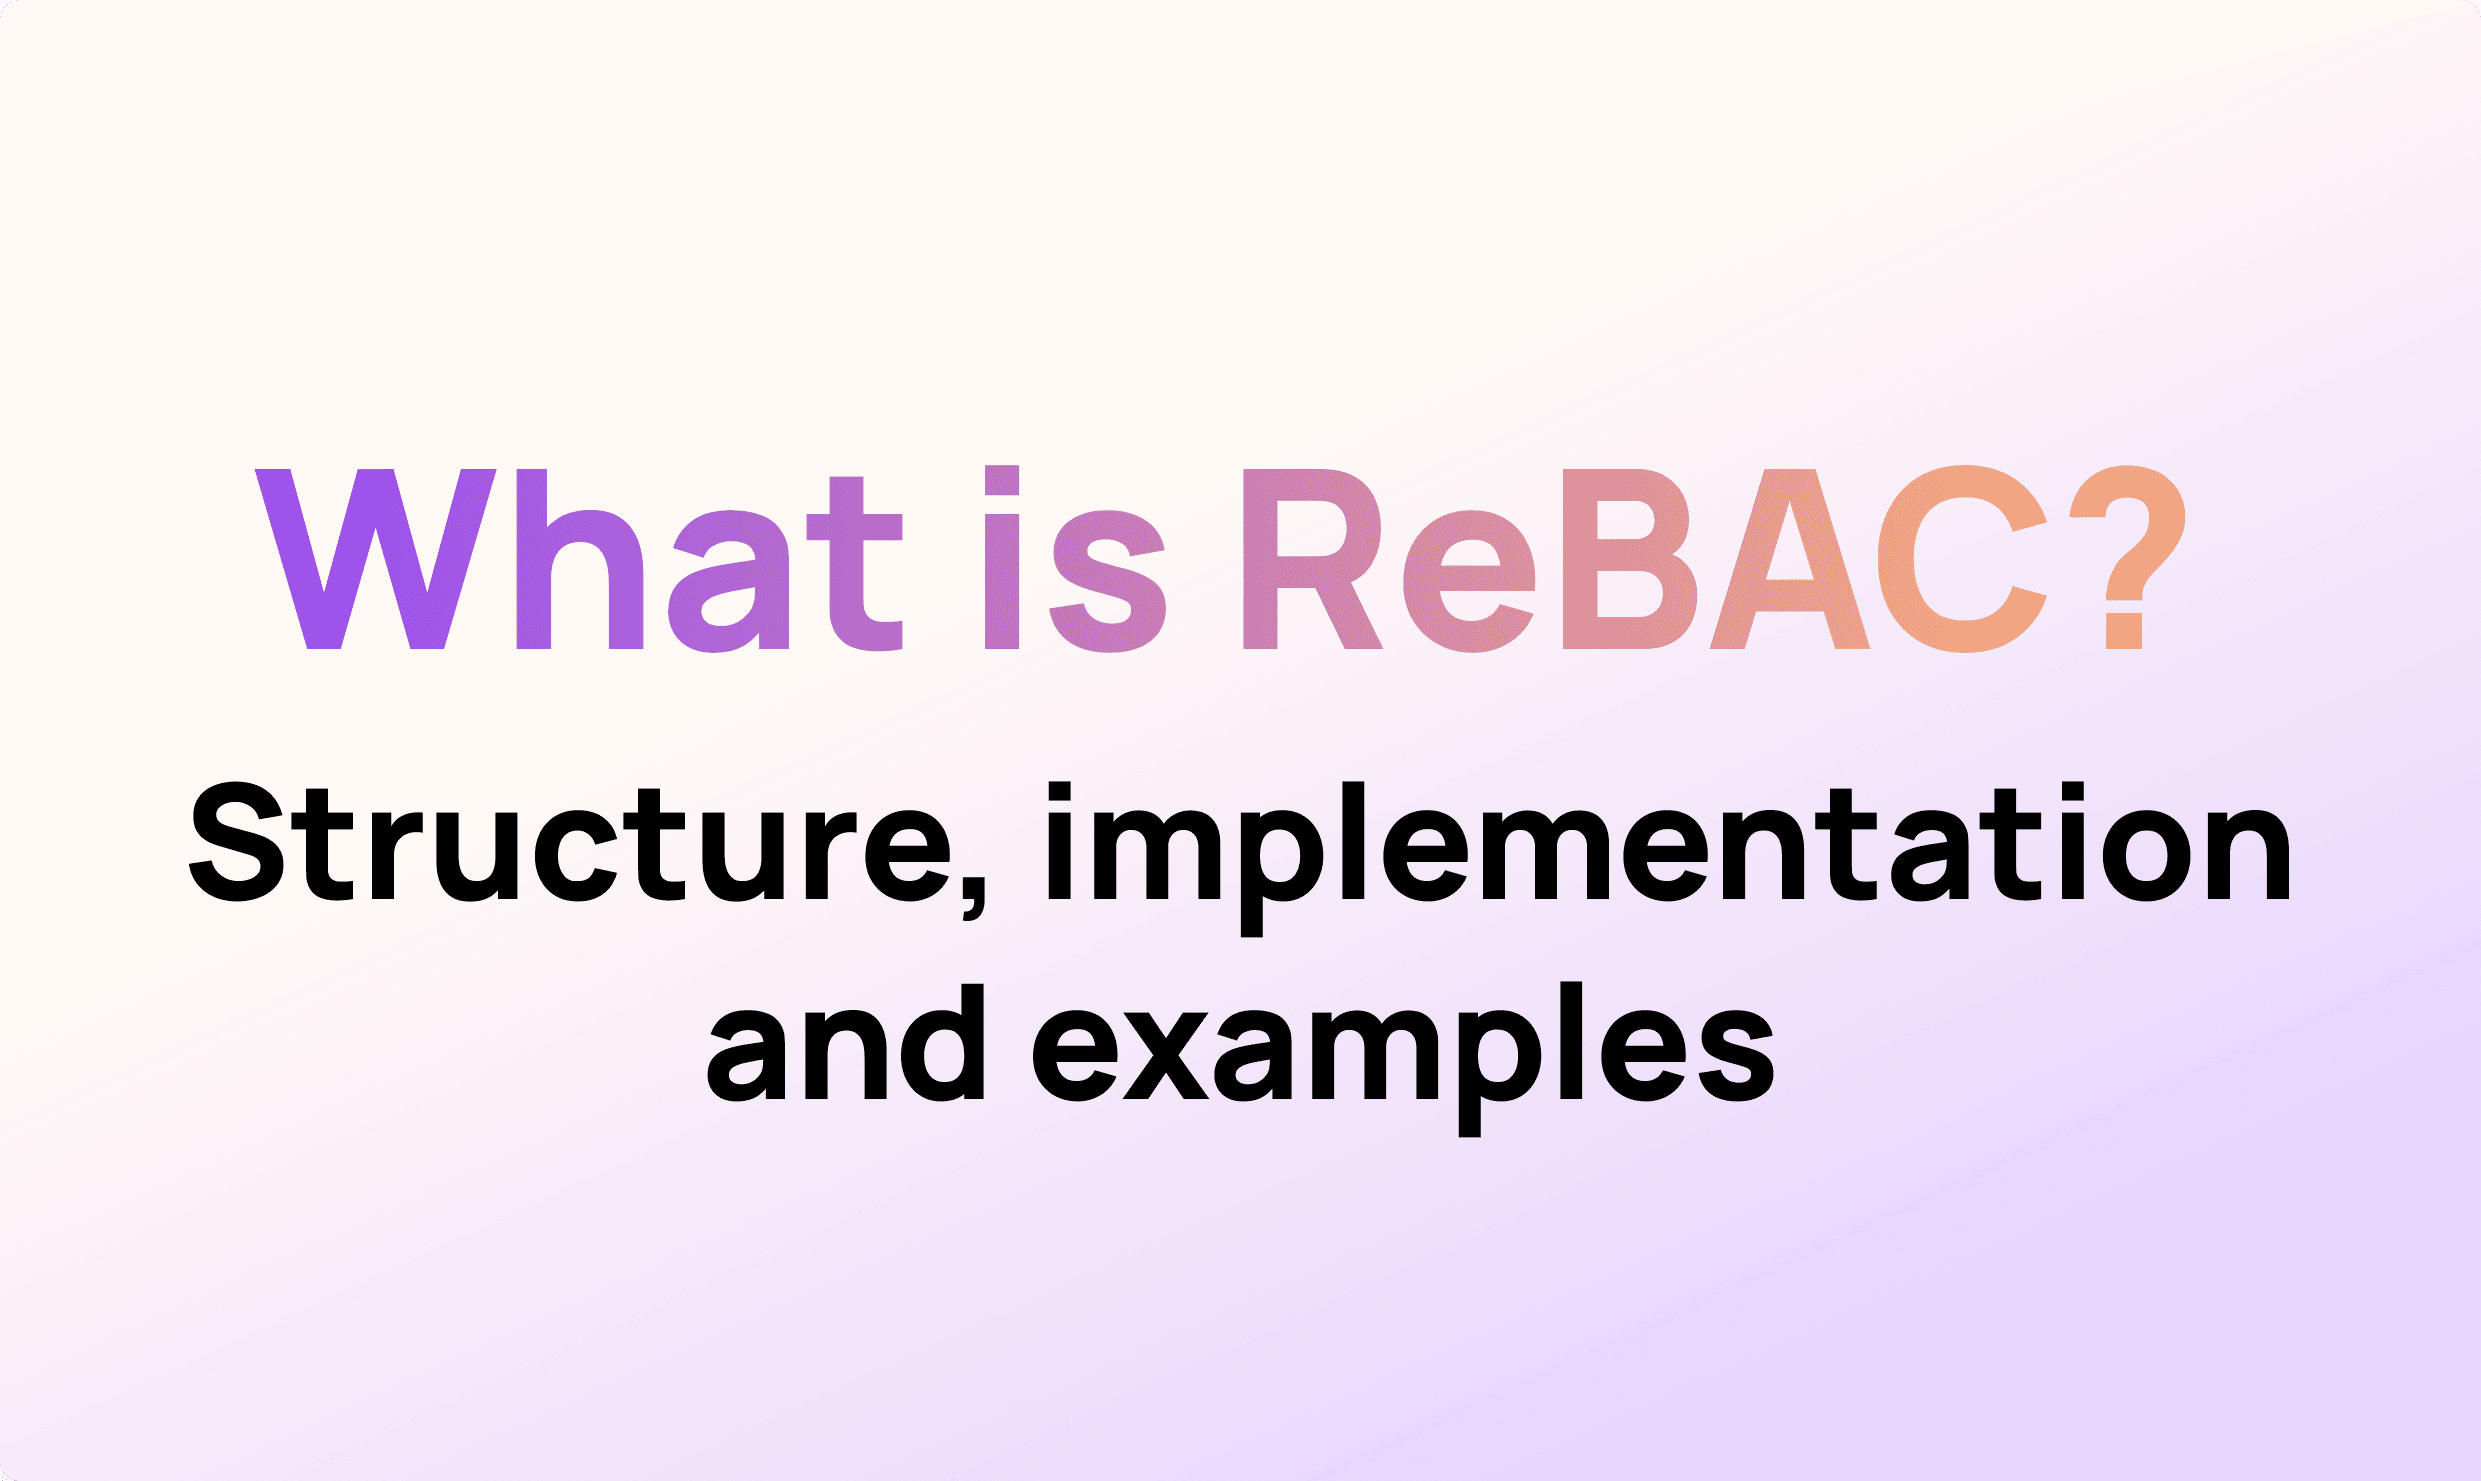 What is Relationship-Based Access Control (ReBAC)?